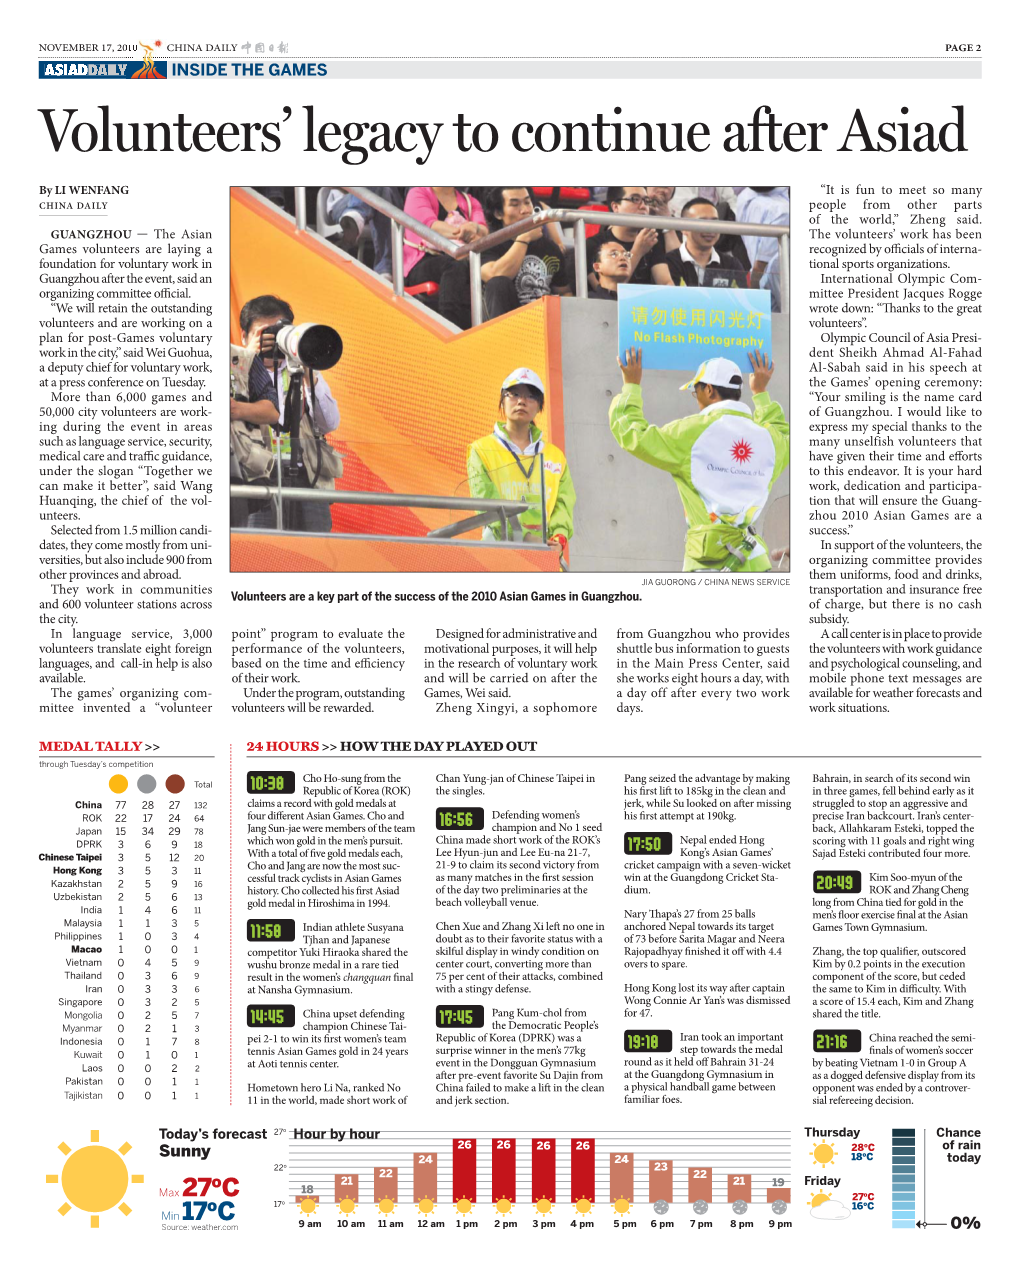 Volunteers' Legacy to Continue After Asiad